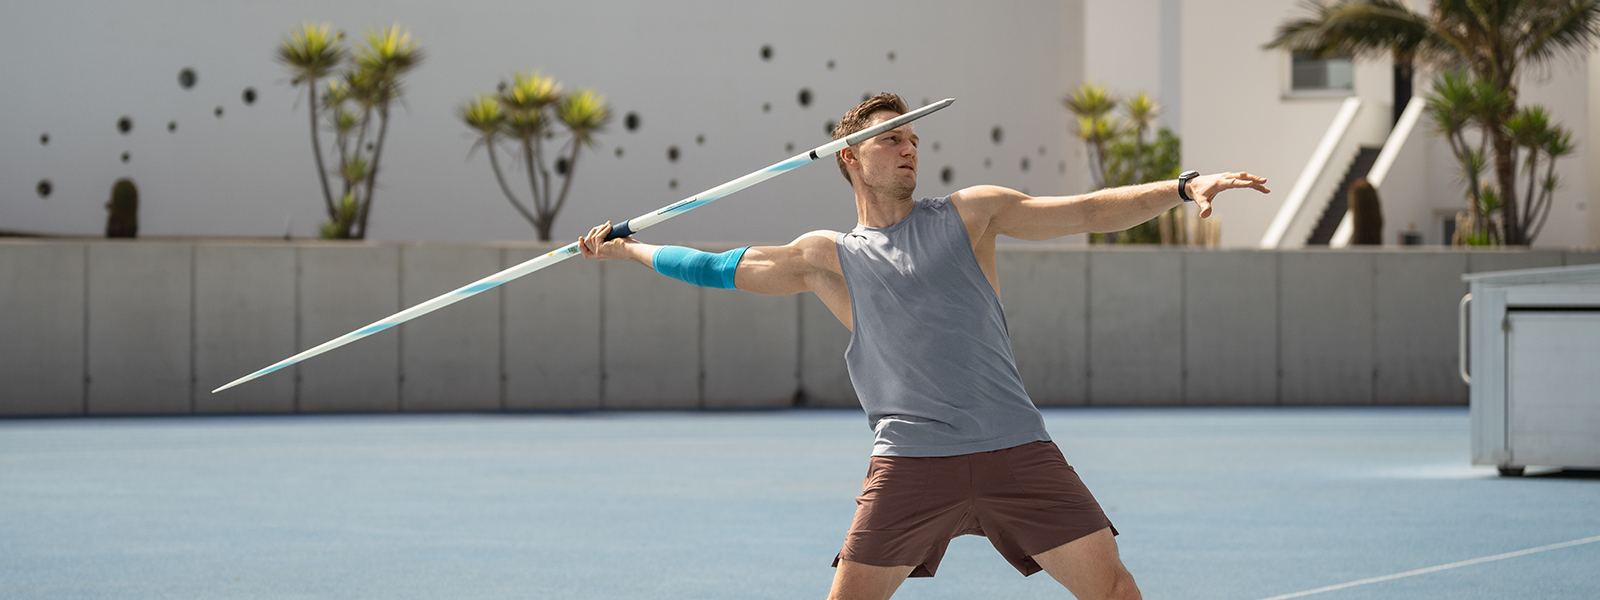 Thomas Röhler wears a blue elbow leeve and is to throw a spear